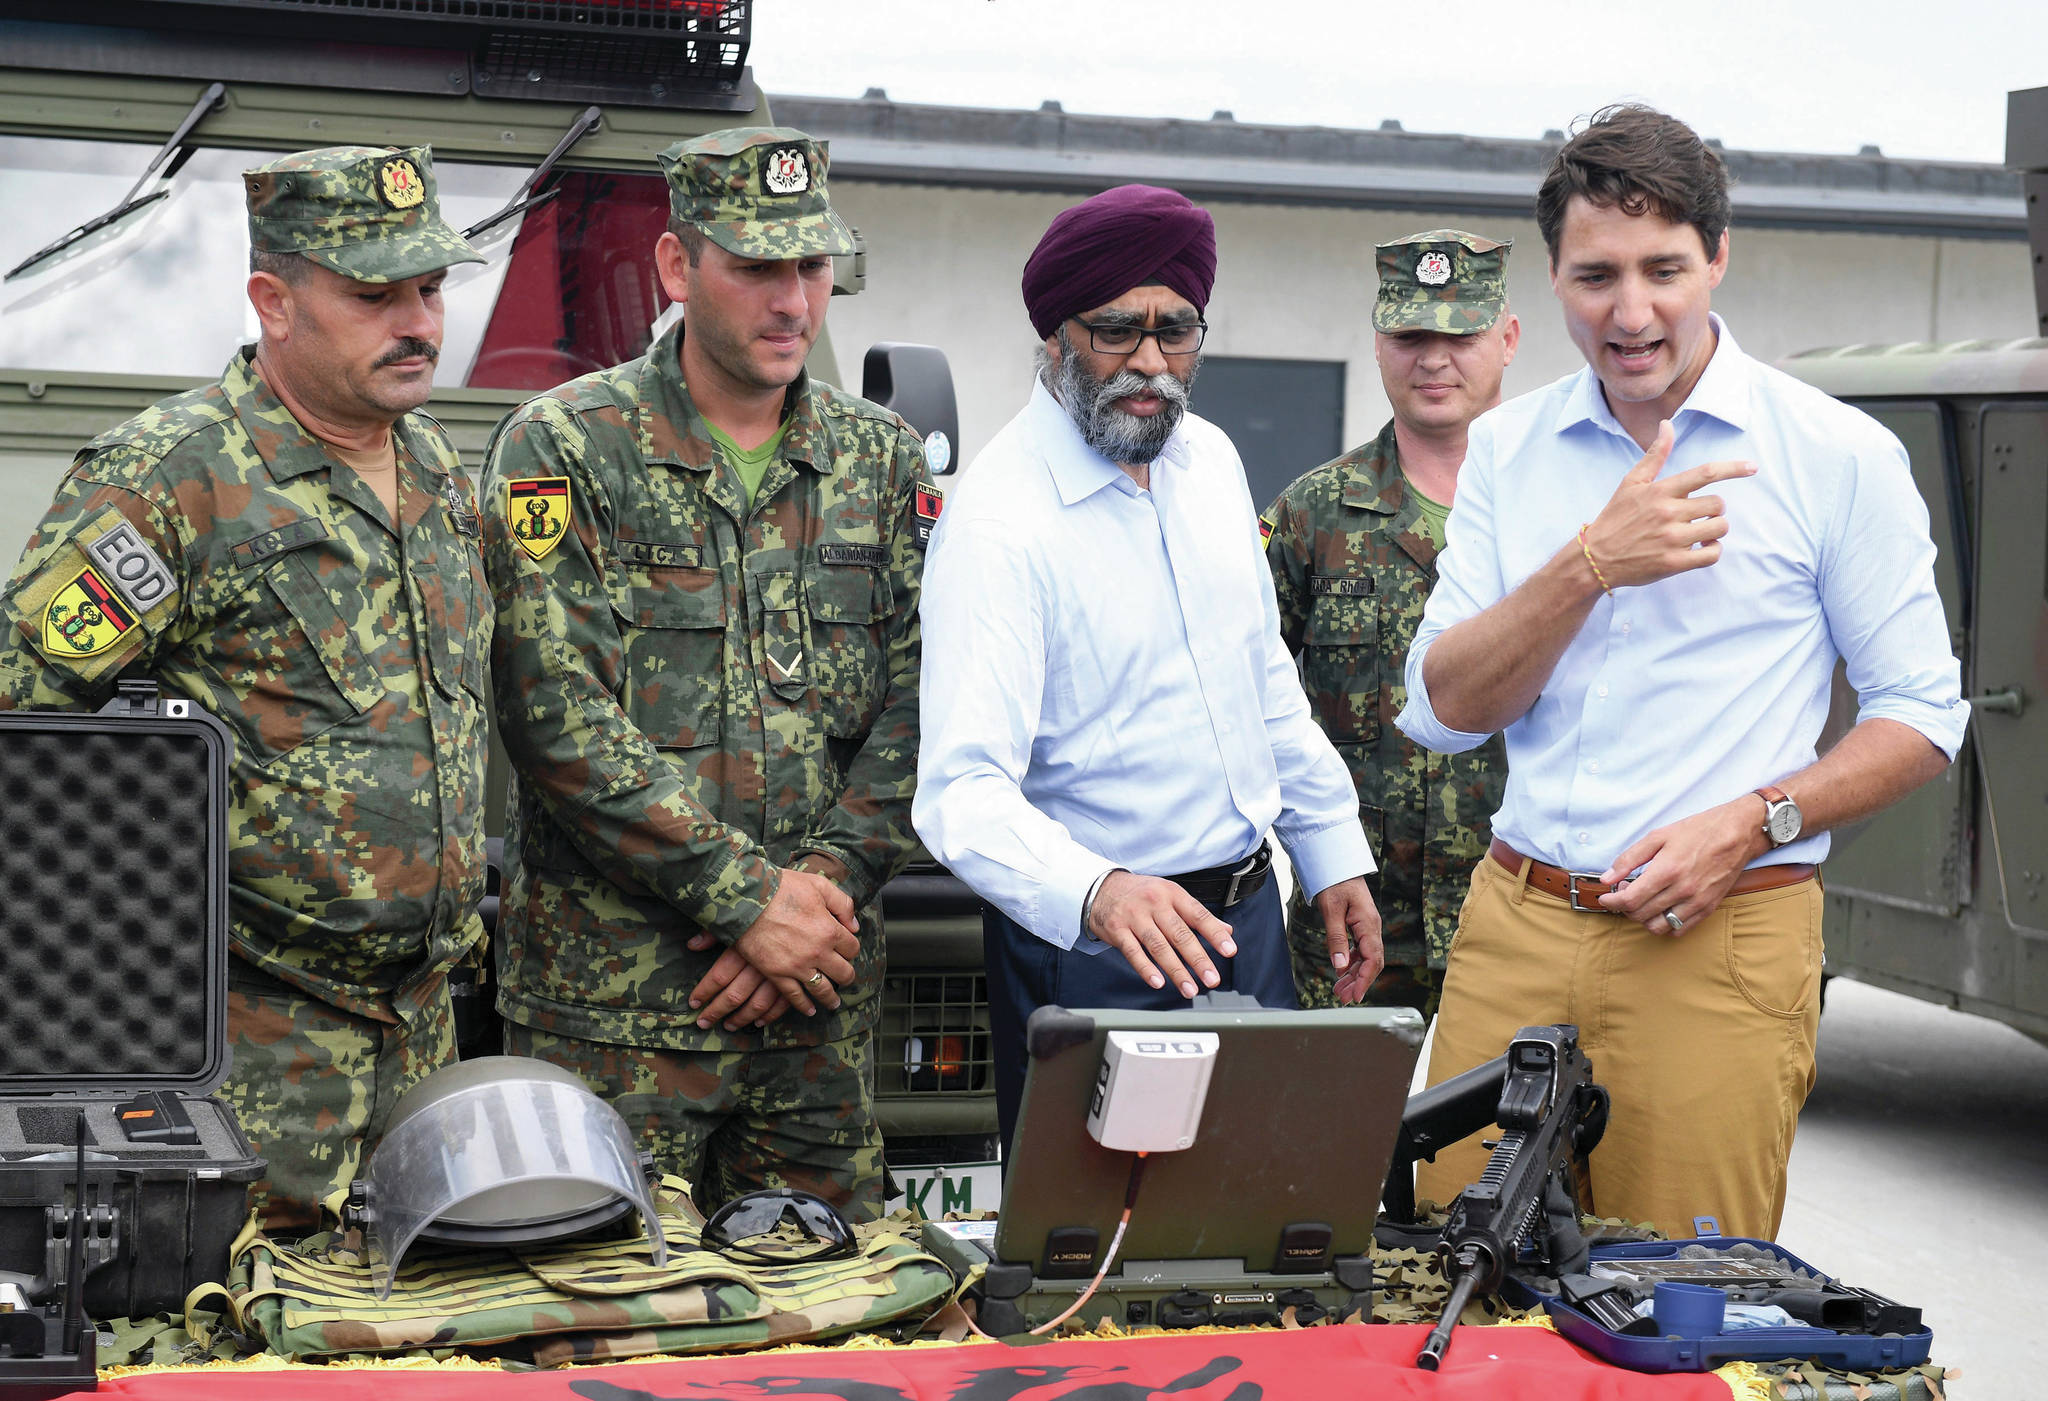 12680669_web1_180711-RDA-Canada-Defence-Spending-PIC